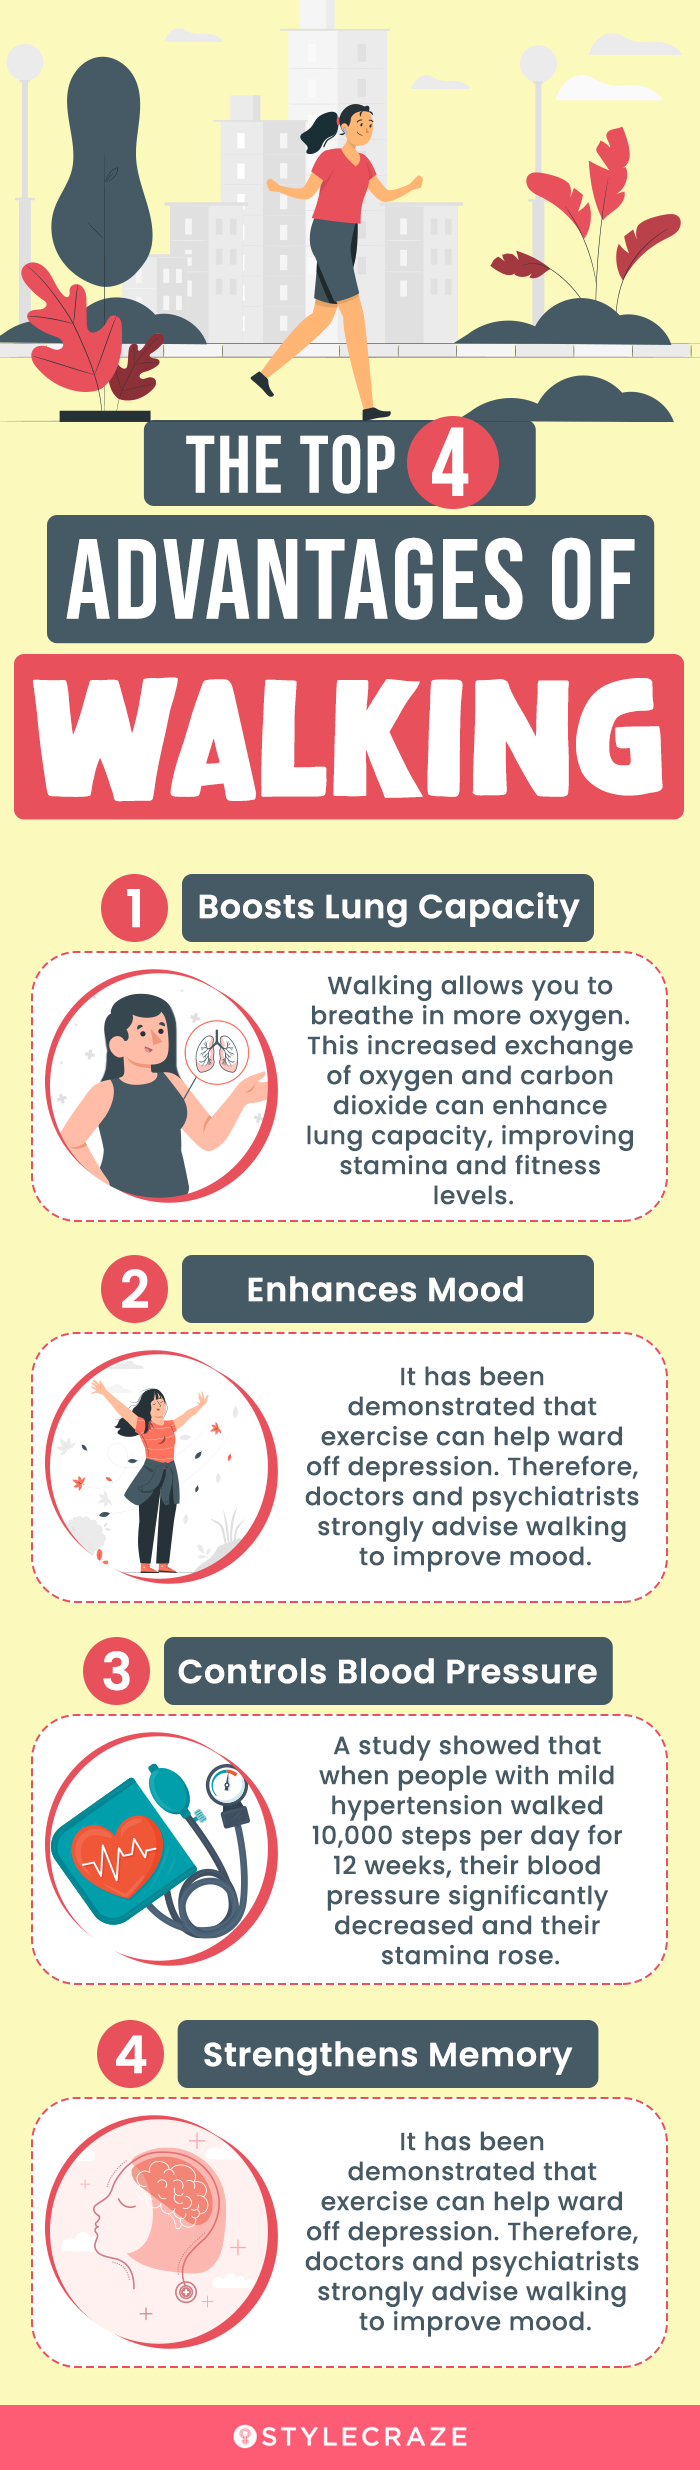 the top 4 advantages of walking [infographic]